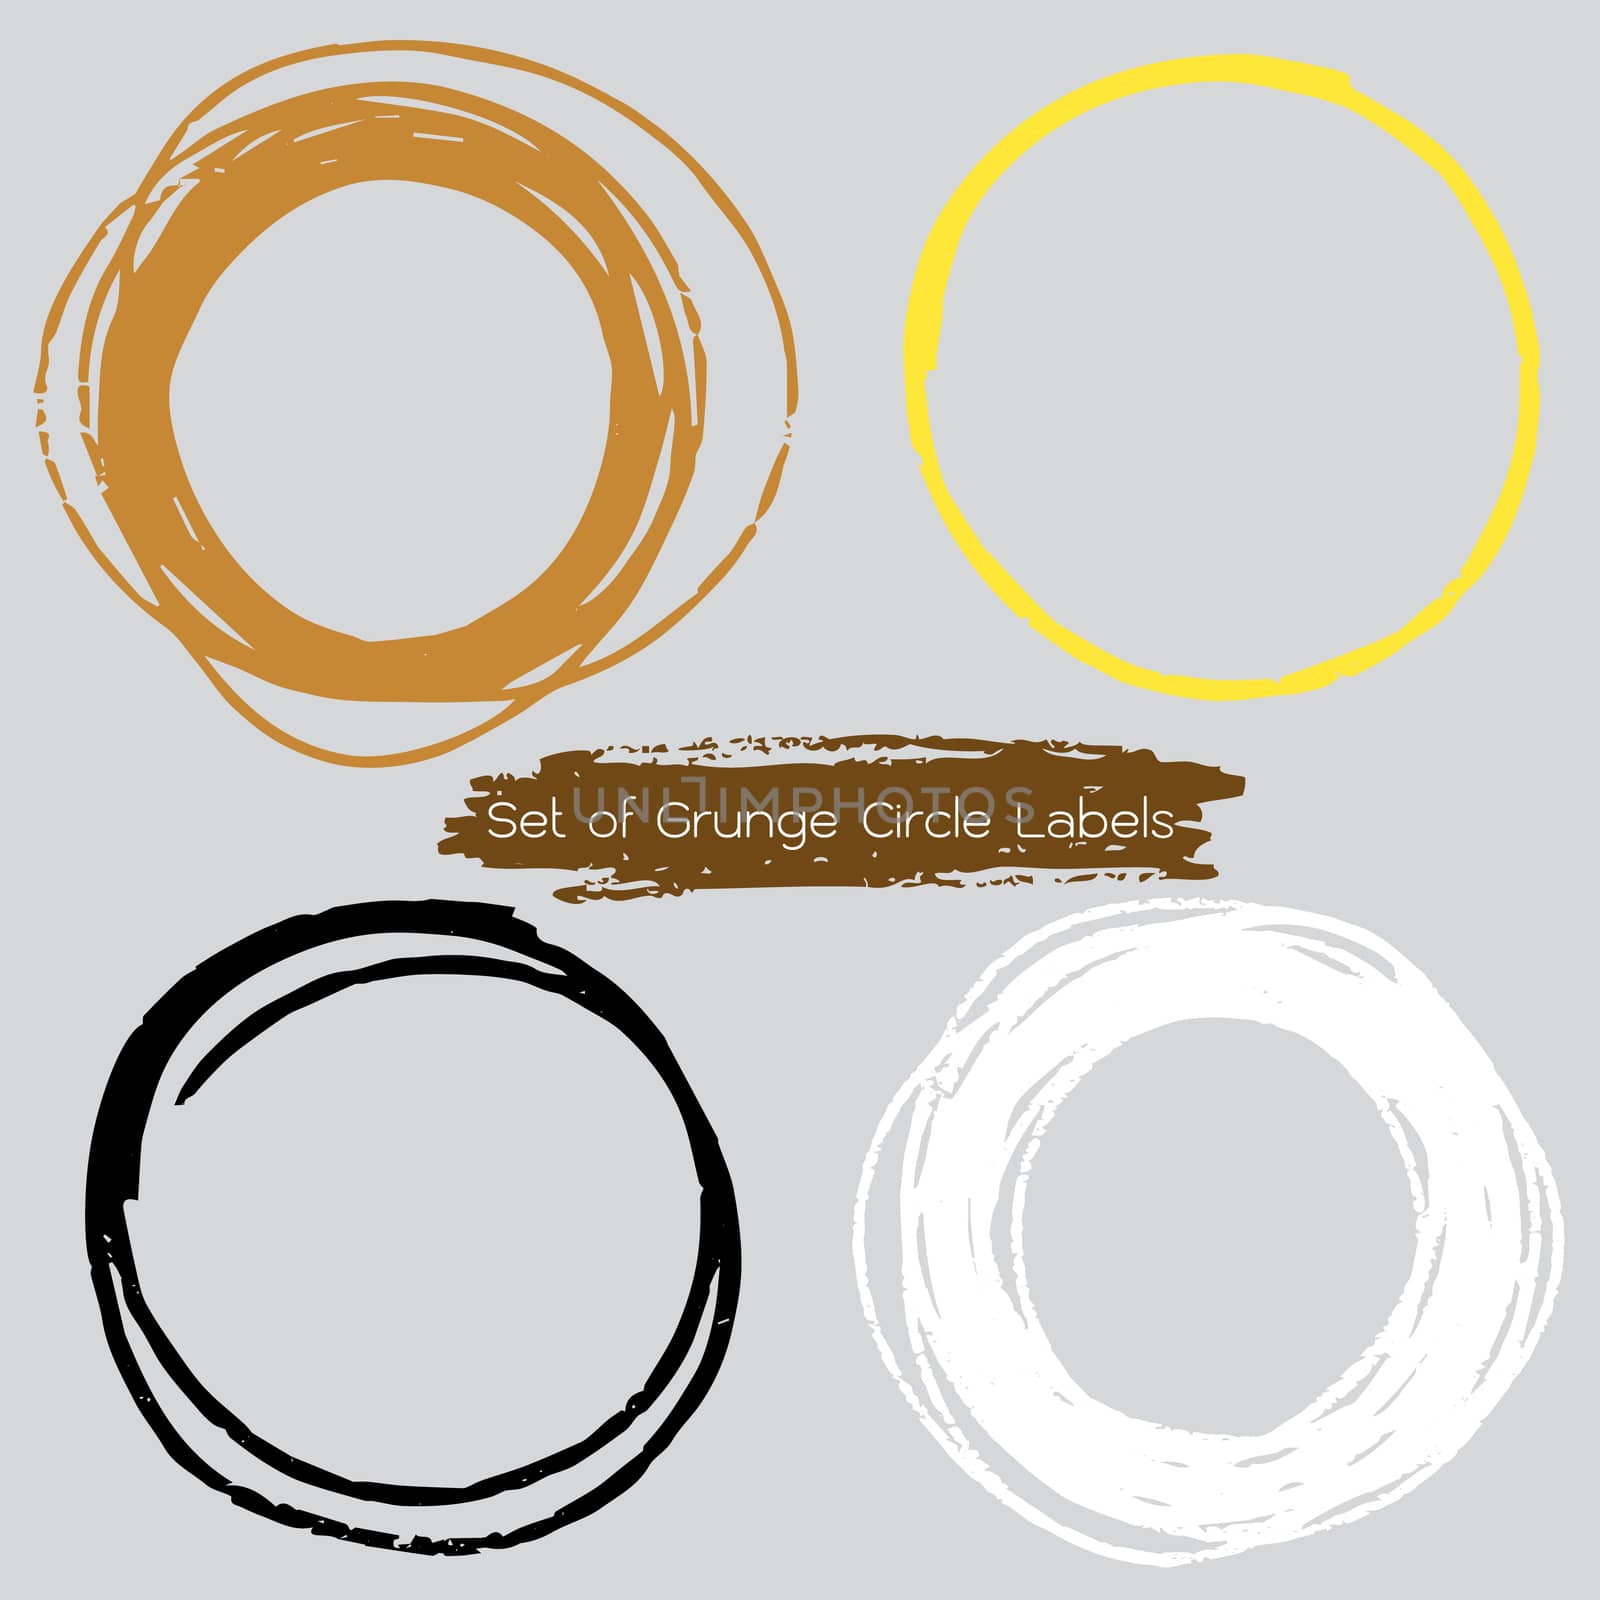 Freehand illustration of set of grunge circle labels, banners doodle hand drawn